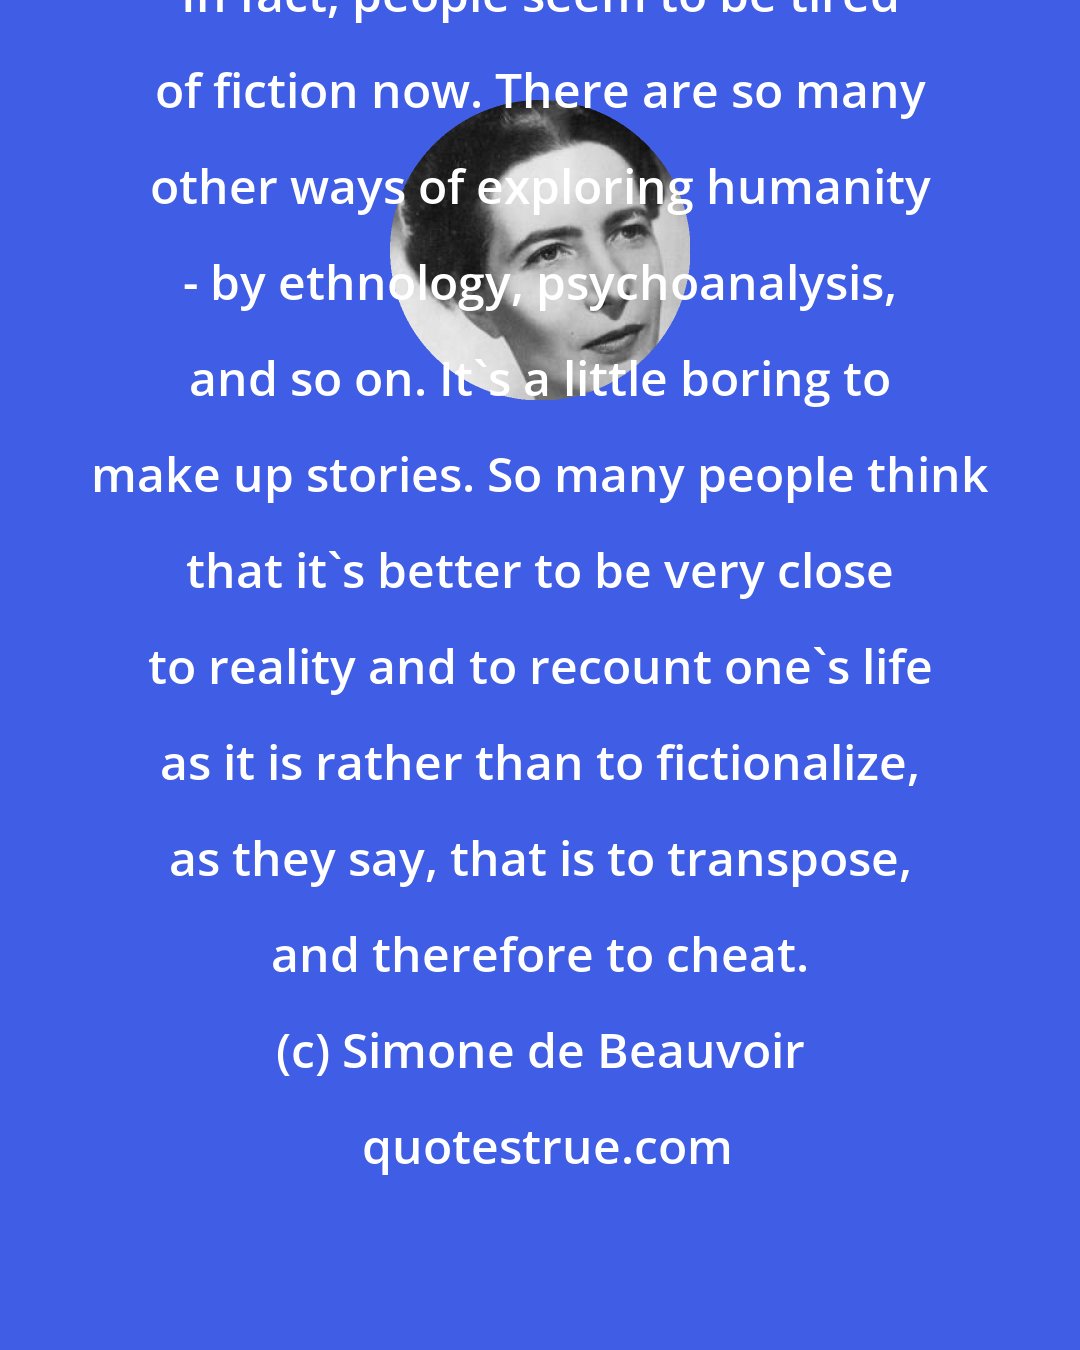 Simone de Beauvoir: In fact, people seem to be tired of fiction now. There are so many other ways of exploring humanity - by ethnology, psychoanalysis, and so on. It's a little boring to make up stories. So many people think that it's better to be very close to reality and to recount one's life as it is rather than to fictionalize, as they say, that is to transpose, and therefore to cheat.